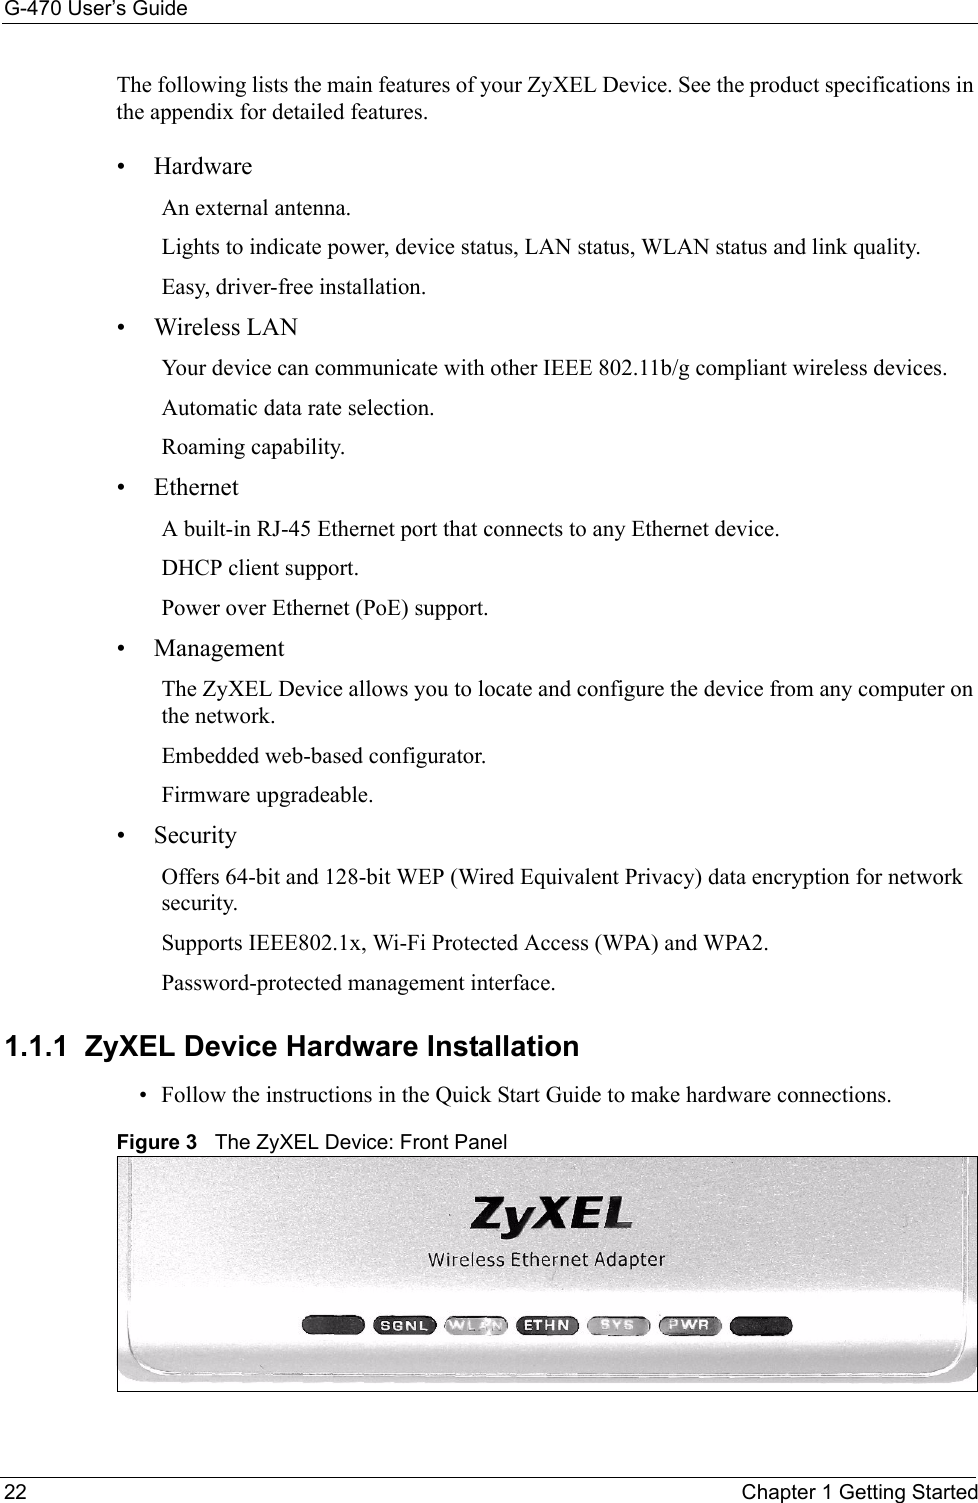 G-470 User’s Guide22 Chapter 1 Getting StartedThe following lists the main features of your ZyXEL Device. See the product specifications in the appendix for detailed features.• HardwareAn external antenna.Lights to indicate power, device status, LAN status, WLAN status and link quality.Easy, driver-free installation. •Wireless LANYour device can communicate with other IEEE 802.11b/g compliant wireless devices.  Automatic data rate selection.  Roaming capability.• EthernetA built-in RJ-45 Ethernet port that connects to any Ethernet device. DHCP client support. Power over Ethernet (PoE) support.  • Management The ZyXEL Device allows you to locate and configure the device from any computer on the network.Embedded web-based configurator. Firmware upgradeable. • SecurityOffers 64-bit and 128-bit WEP (Wired Equivalent Privacy) data encryption for network security.Supports IEEE802.1x, Wi-Fi Protected Access (WPA) and WPA2.  Password-protected management interface. 1.1.1  ZyXEL Device Hardware Installation• Follow the instructions in the Quick Start Guide to make hardware connections. Figure 3   The ZyXEL Device: Front Panel